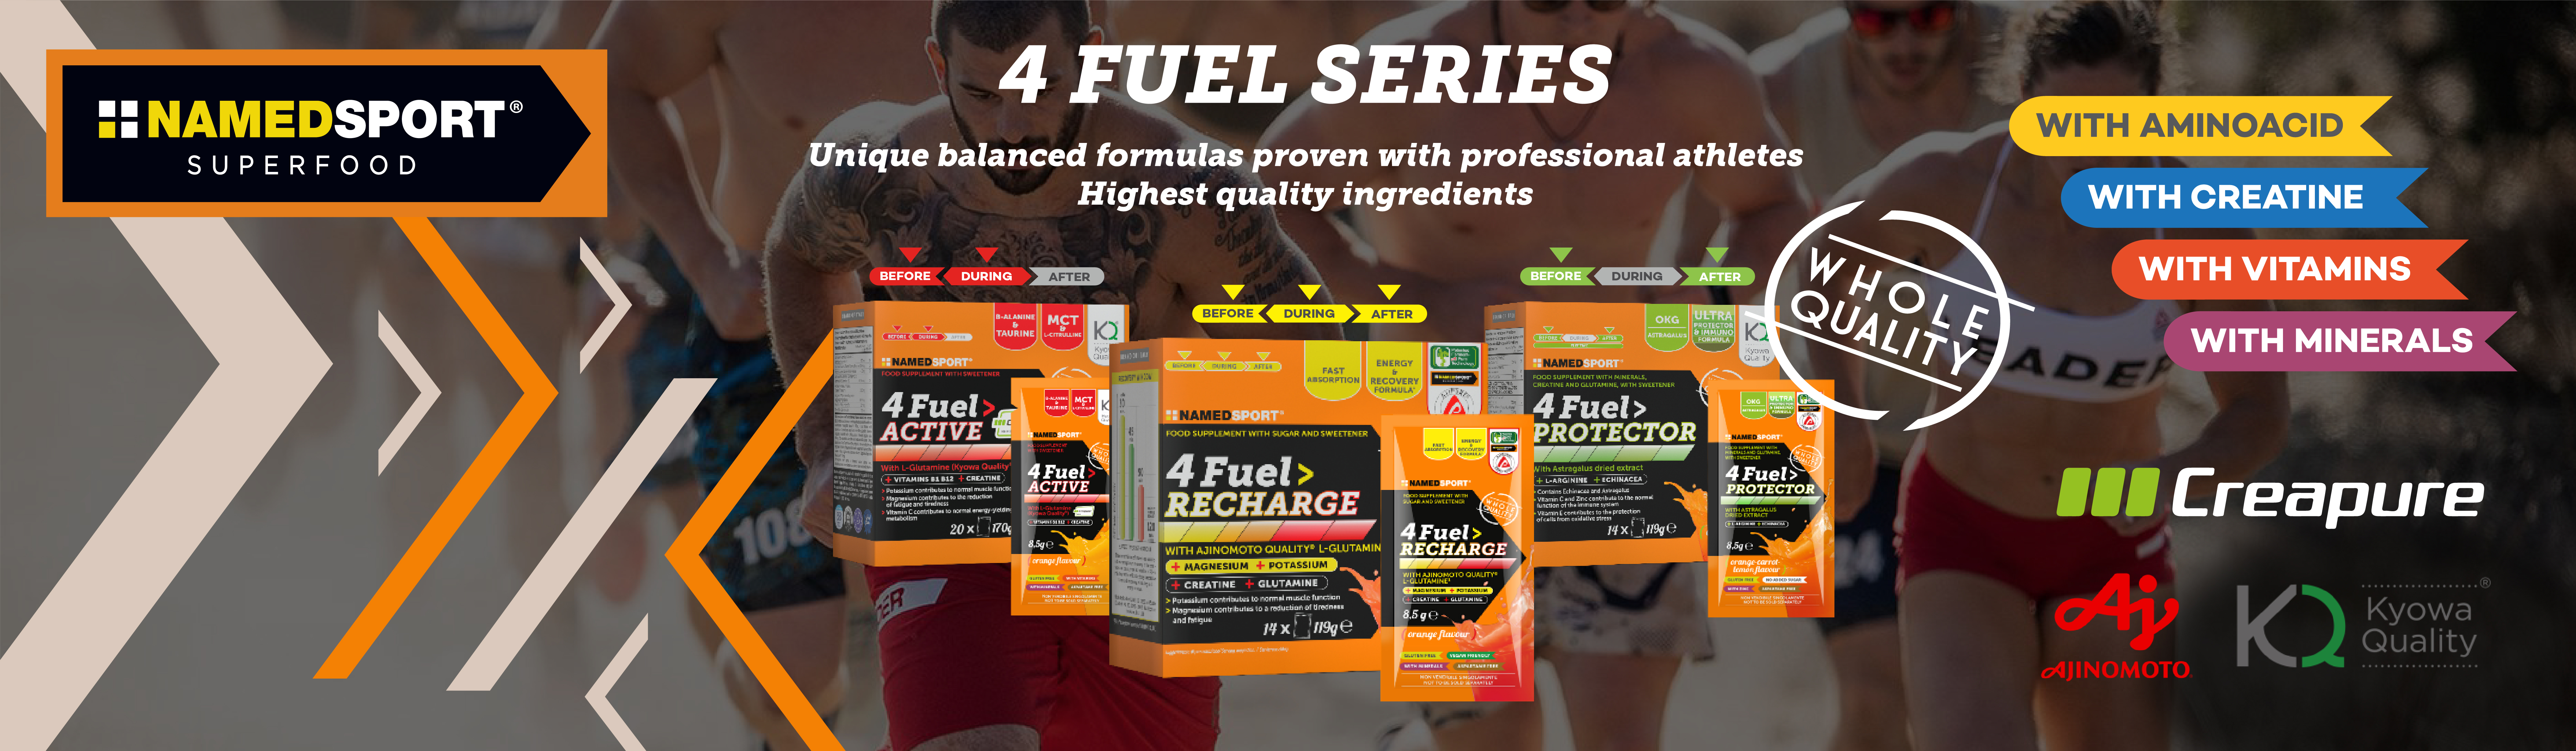 4fuel all in one balanced profesional creatine amino acids bcaa eaa power recovery mascle mass